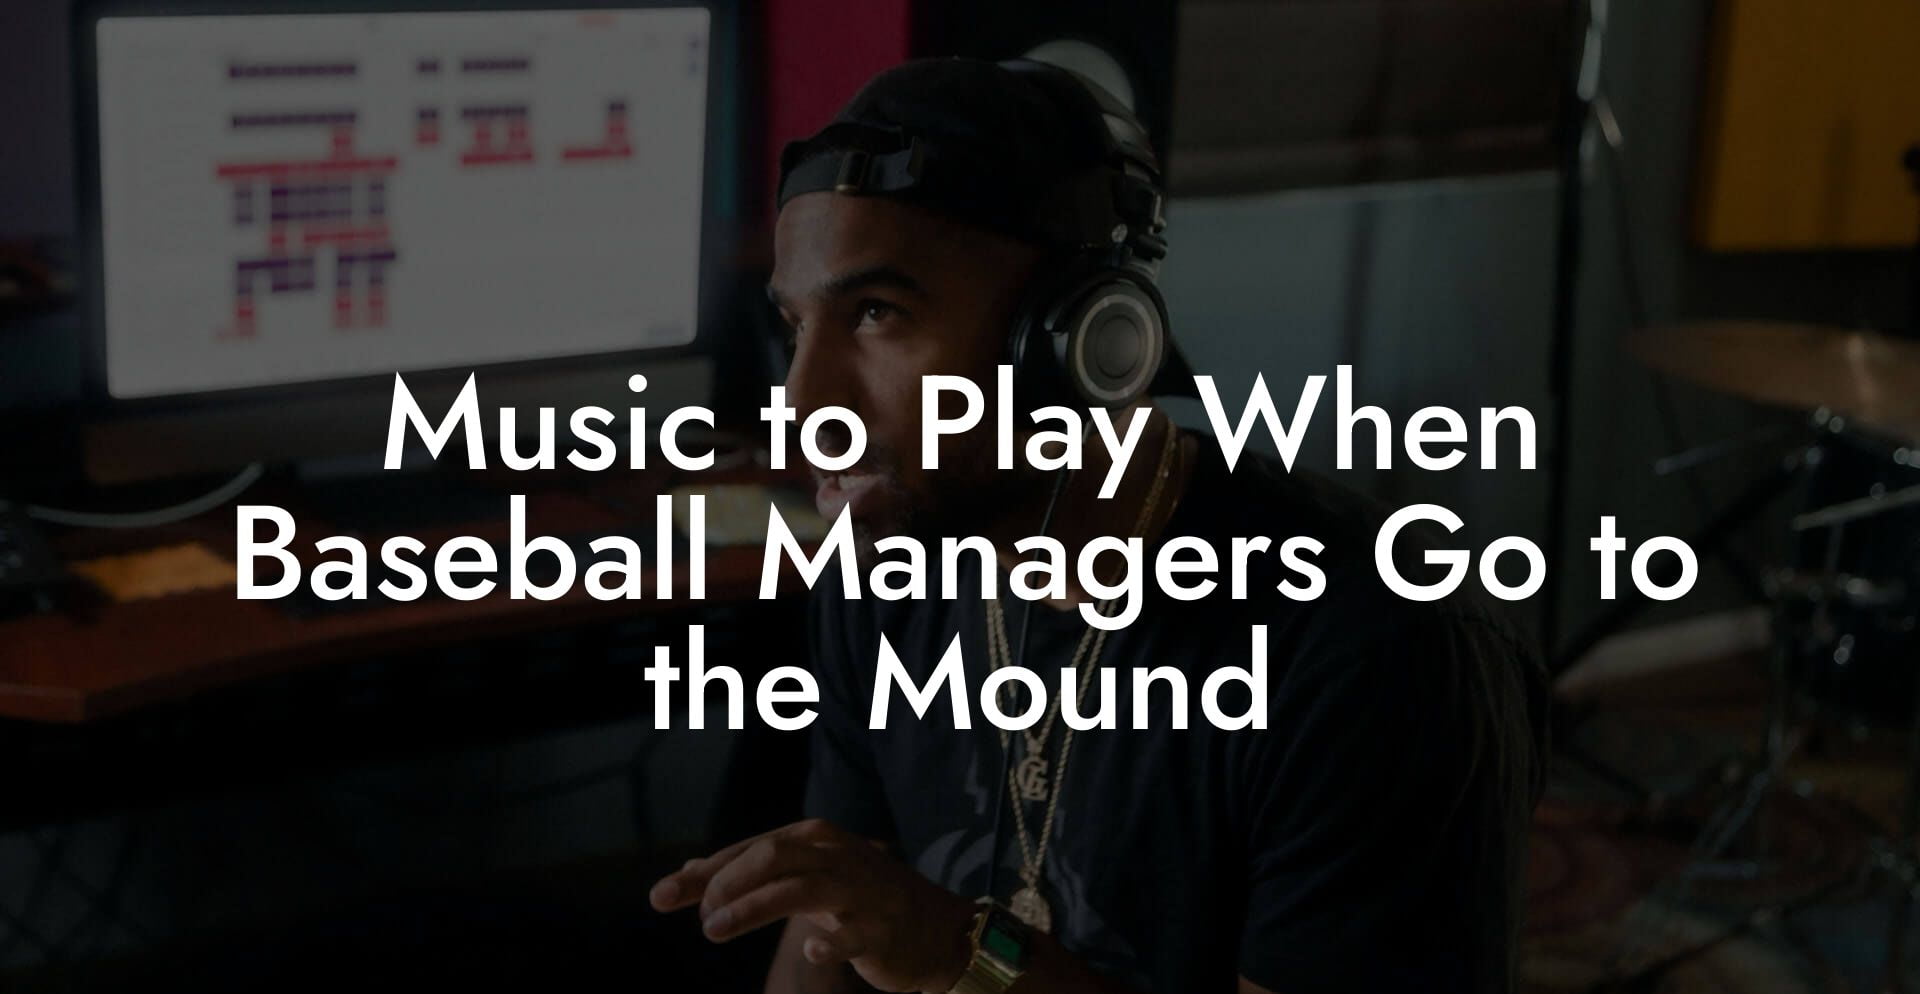 Music to Play When Baseball Managers Go to the Mound